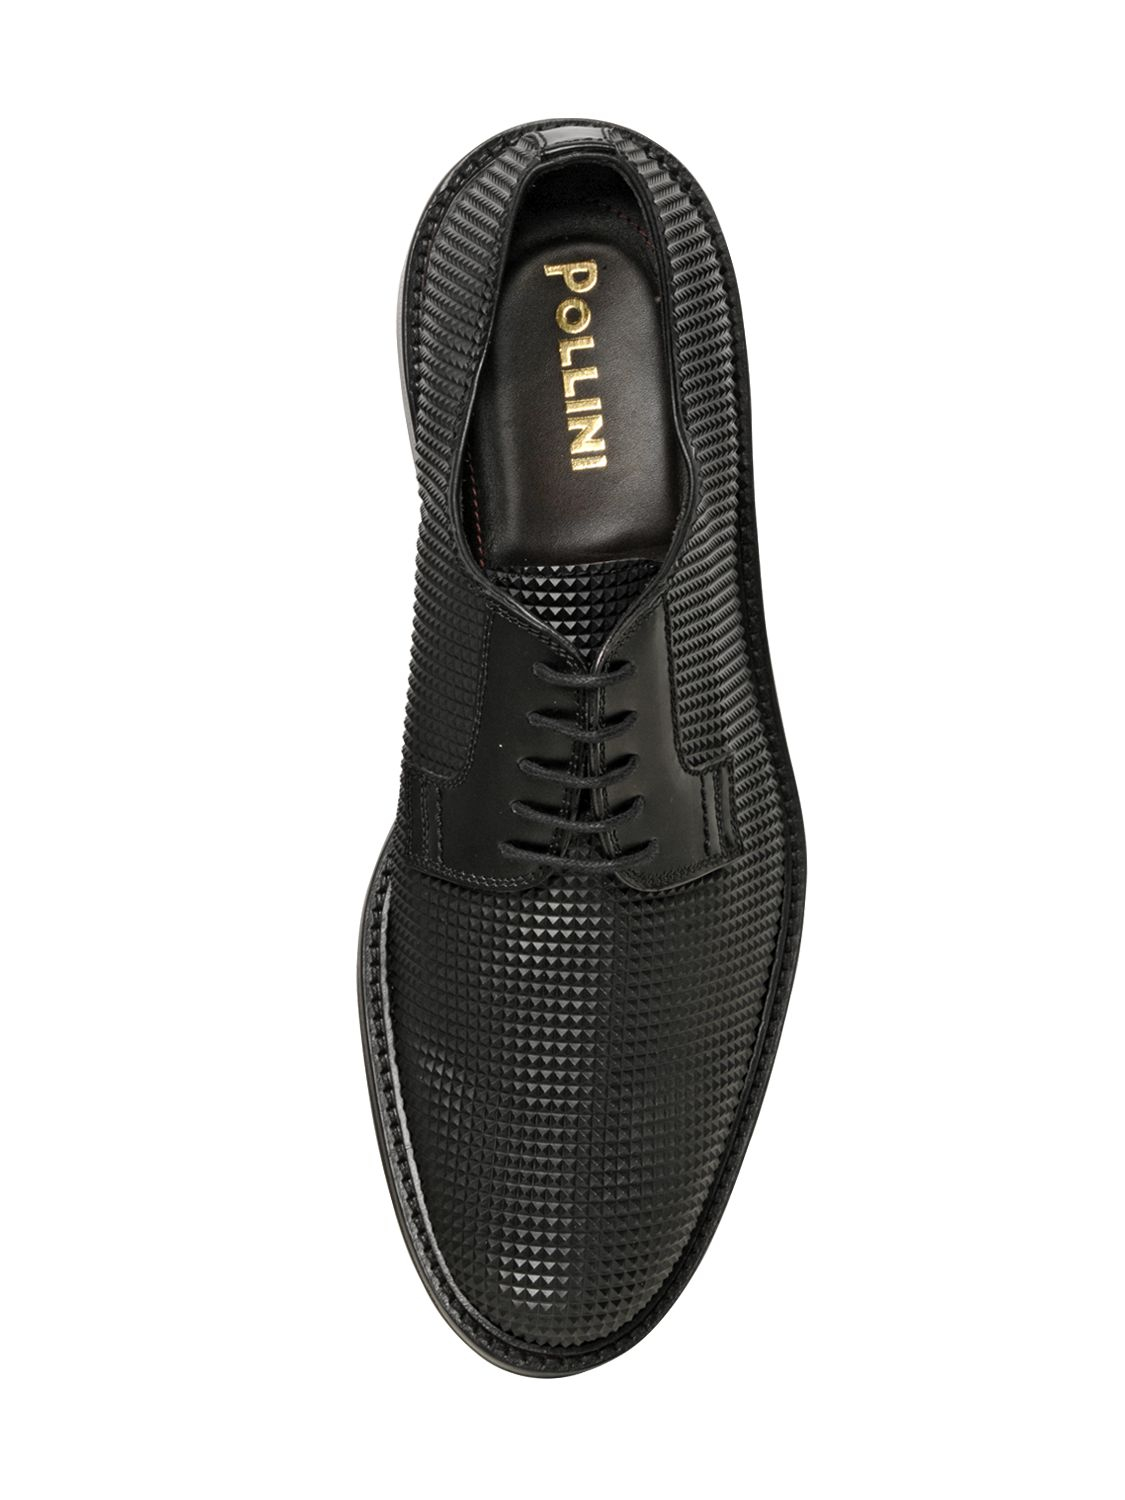 Pollini Embossed Rubber \u0026 Leather Derby Shoes in Black for Men - Lyst